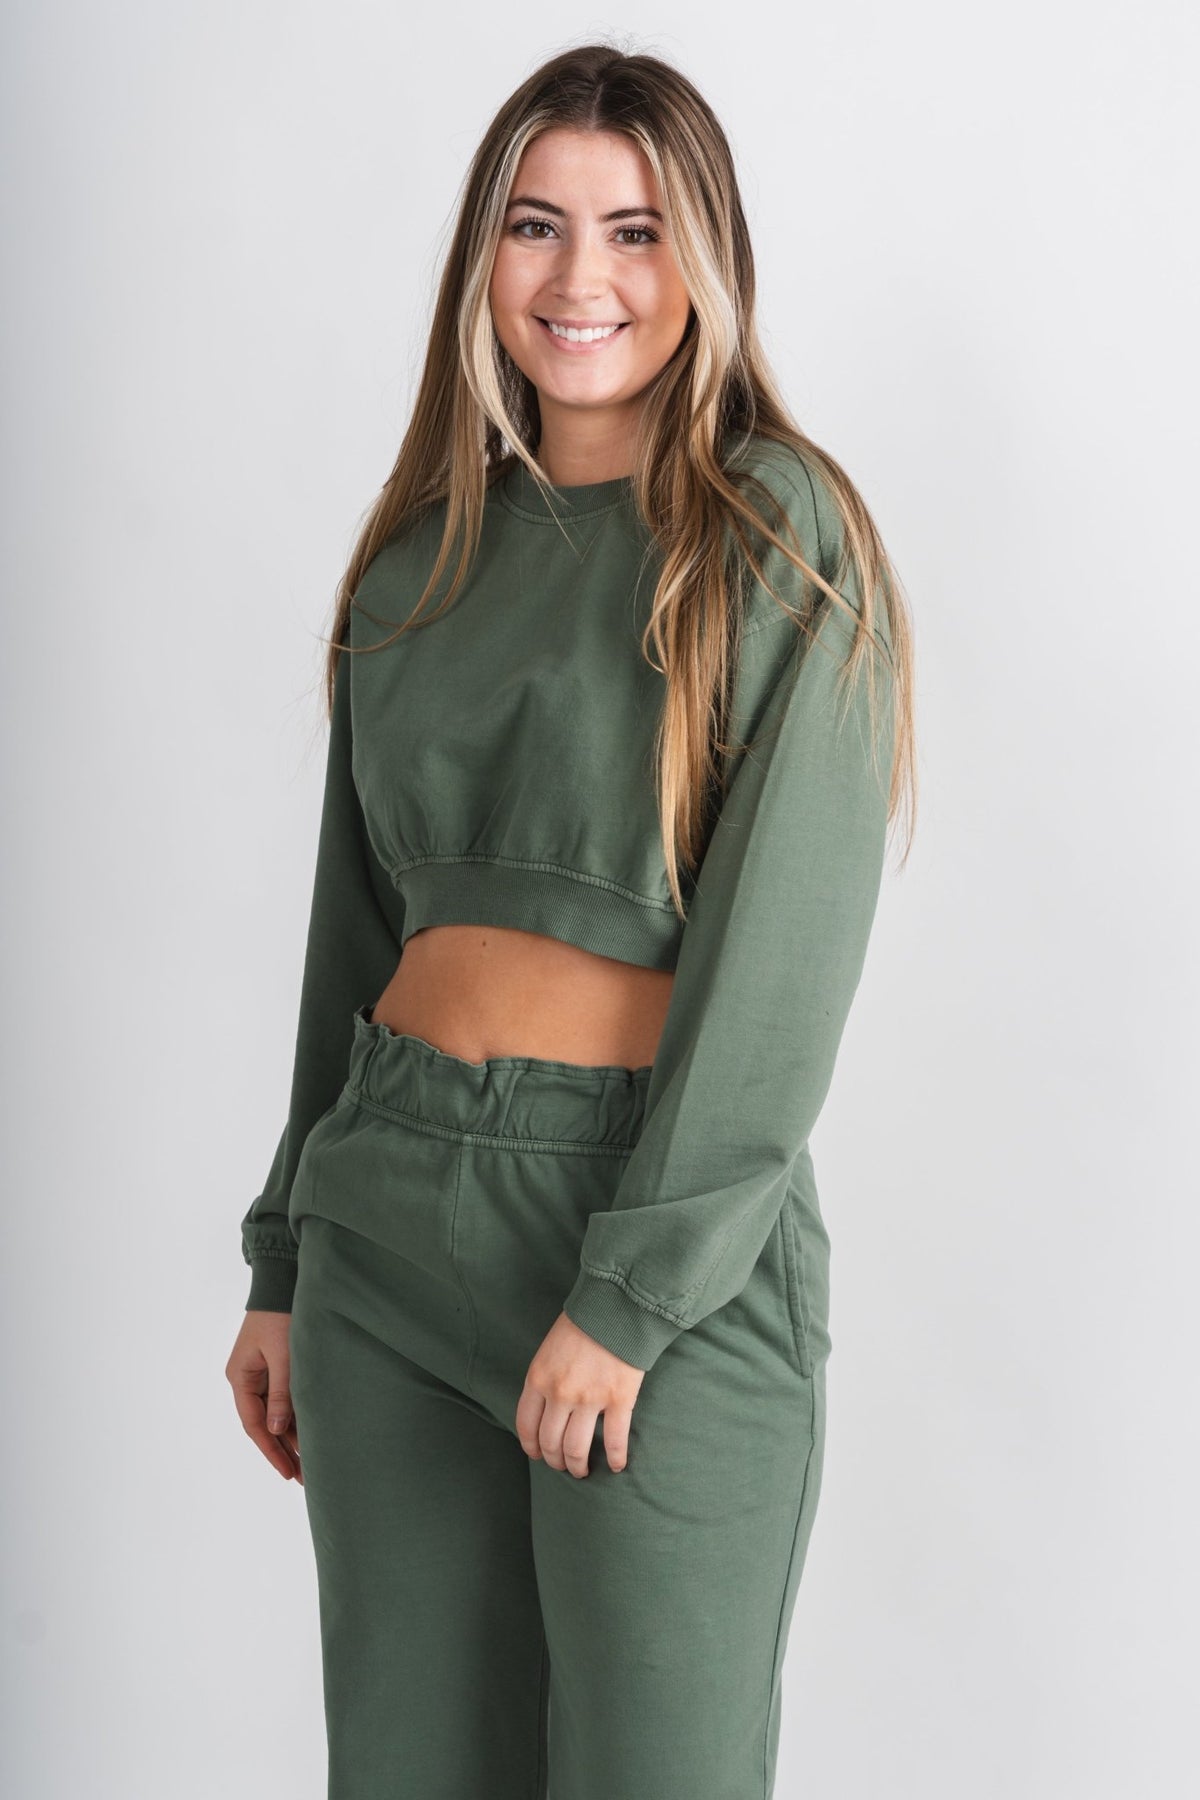 Cropped sweatshirt gray green - Trendy Sweatshirt - Cute Loungewear Collection at Lush Fashion Lounge Boutique in Oklahoma City